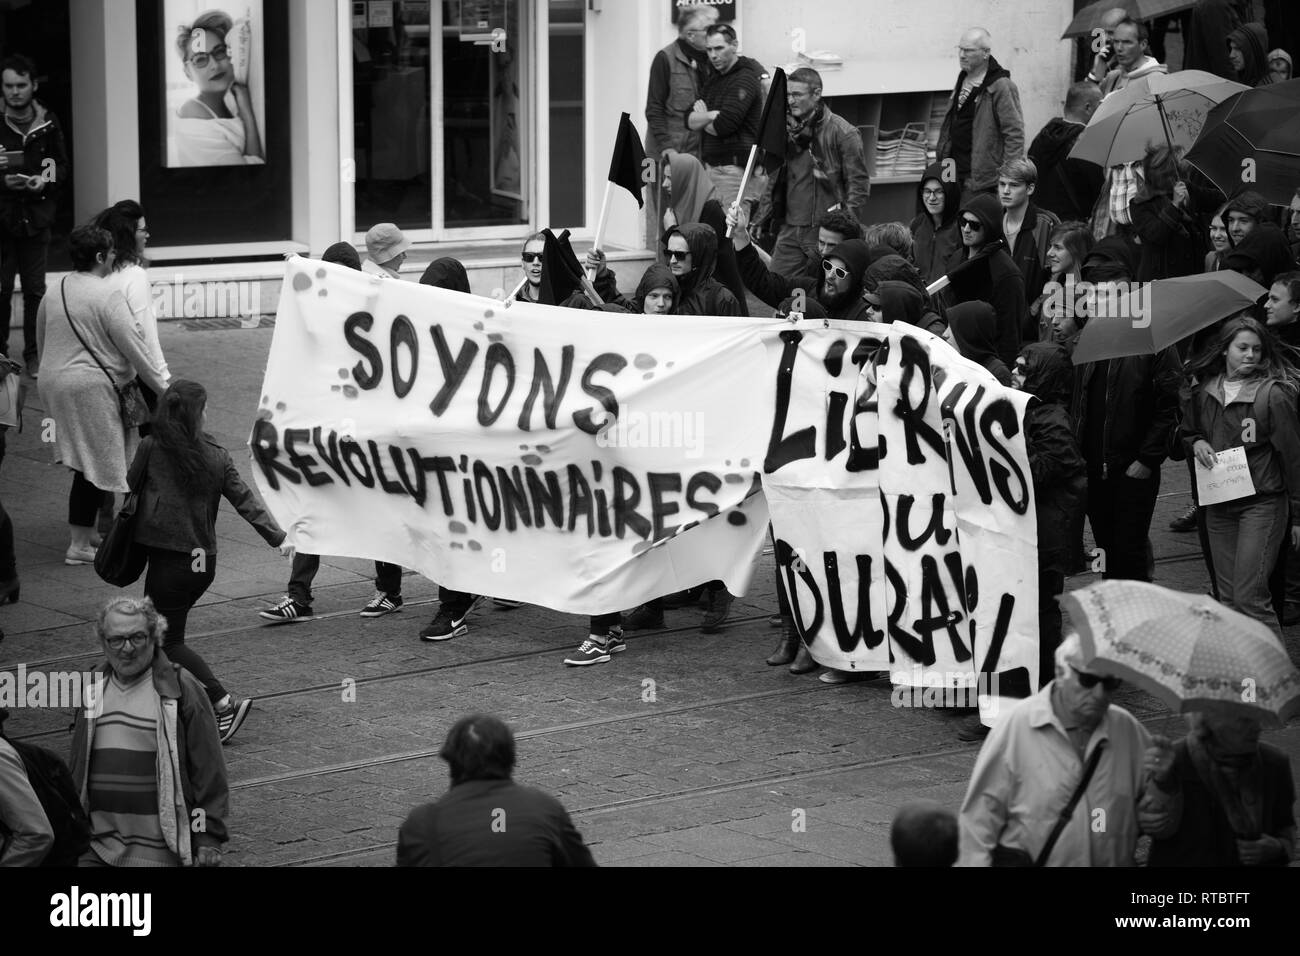 STRASBOURG, FRANCE - SEPT 12, 2017: Soyons Revolutionnaires translated as Be Revolutionary poster by incognito young people at French Nationwide day of protest against the labor reform proposed by Emmanuel Macron Government Stock Photo